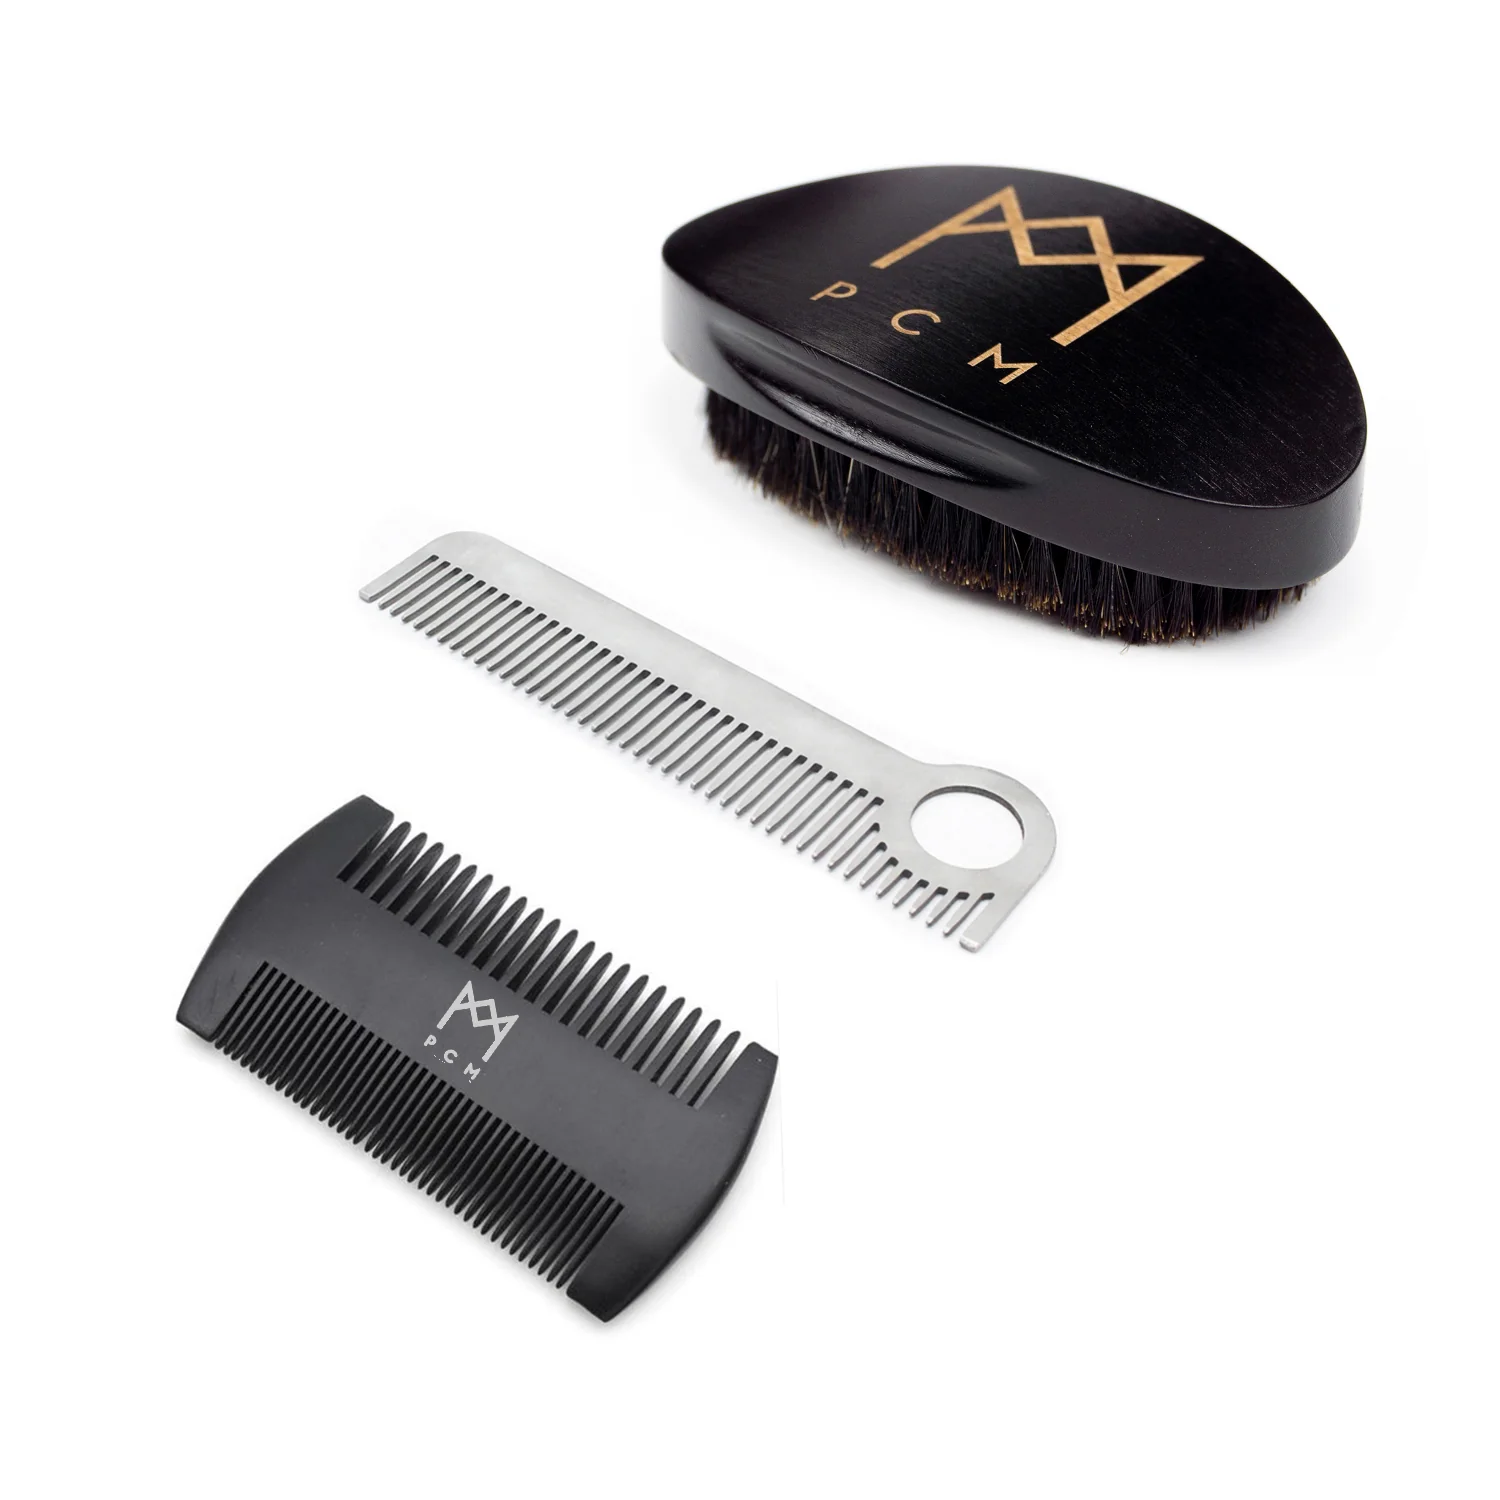 BRUSHES, PICKS & COMBS